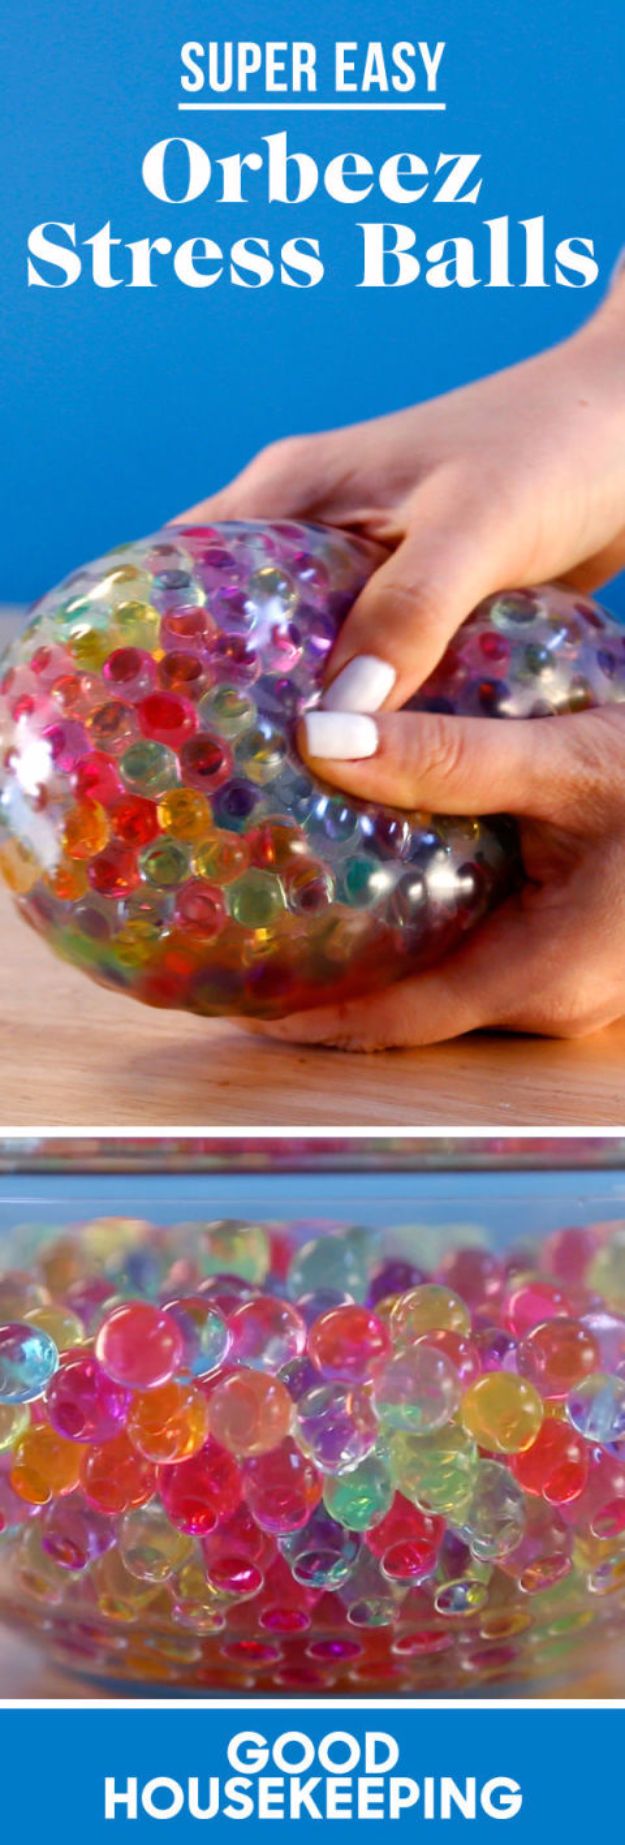 Crafts for Teens to Make and Sell - DIY Orbeez Stress Ball - Cheap and Easy DIY Ideas To Make For Extra Money - Best Things to Sell On Etsy, Dollar Store Craft Ideas, Quick Projects for Teenagers To Make Spending Cash - DIY Gifts, Wall Art, School Supplies, Room Decor, Jewelry, Fashion, Hair Accessories, Bracelets, Magnets #teencrafts #craftstosell #etsyideass